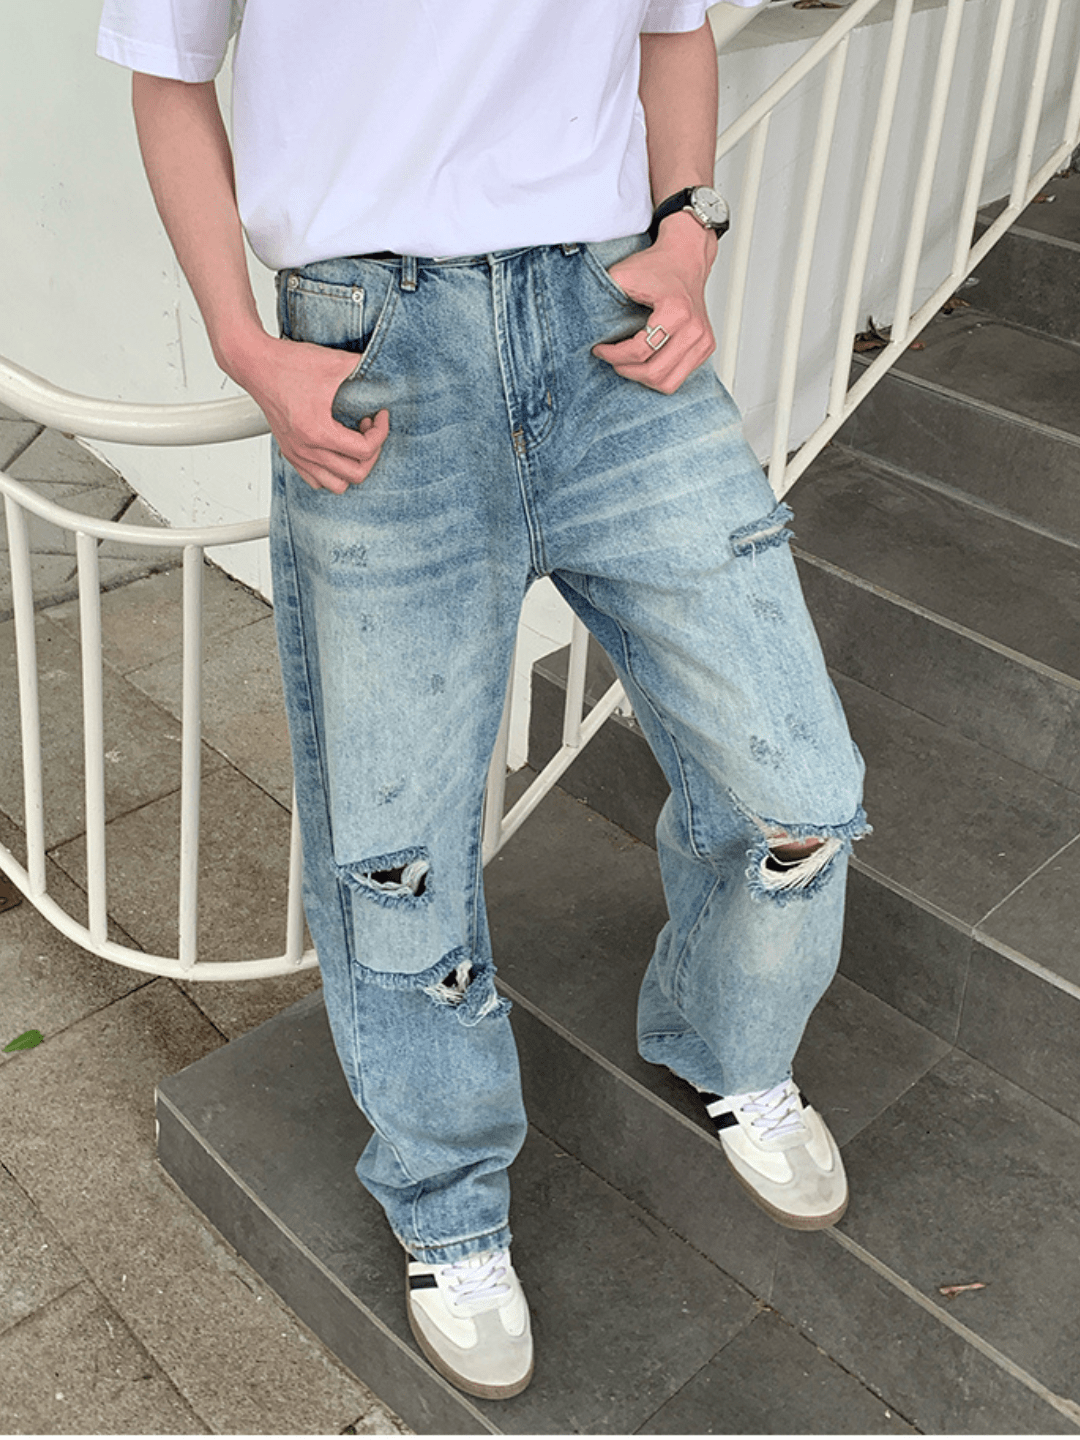 [ONELYC1NS] Distressed Ripped Denim na1091 